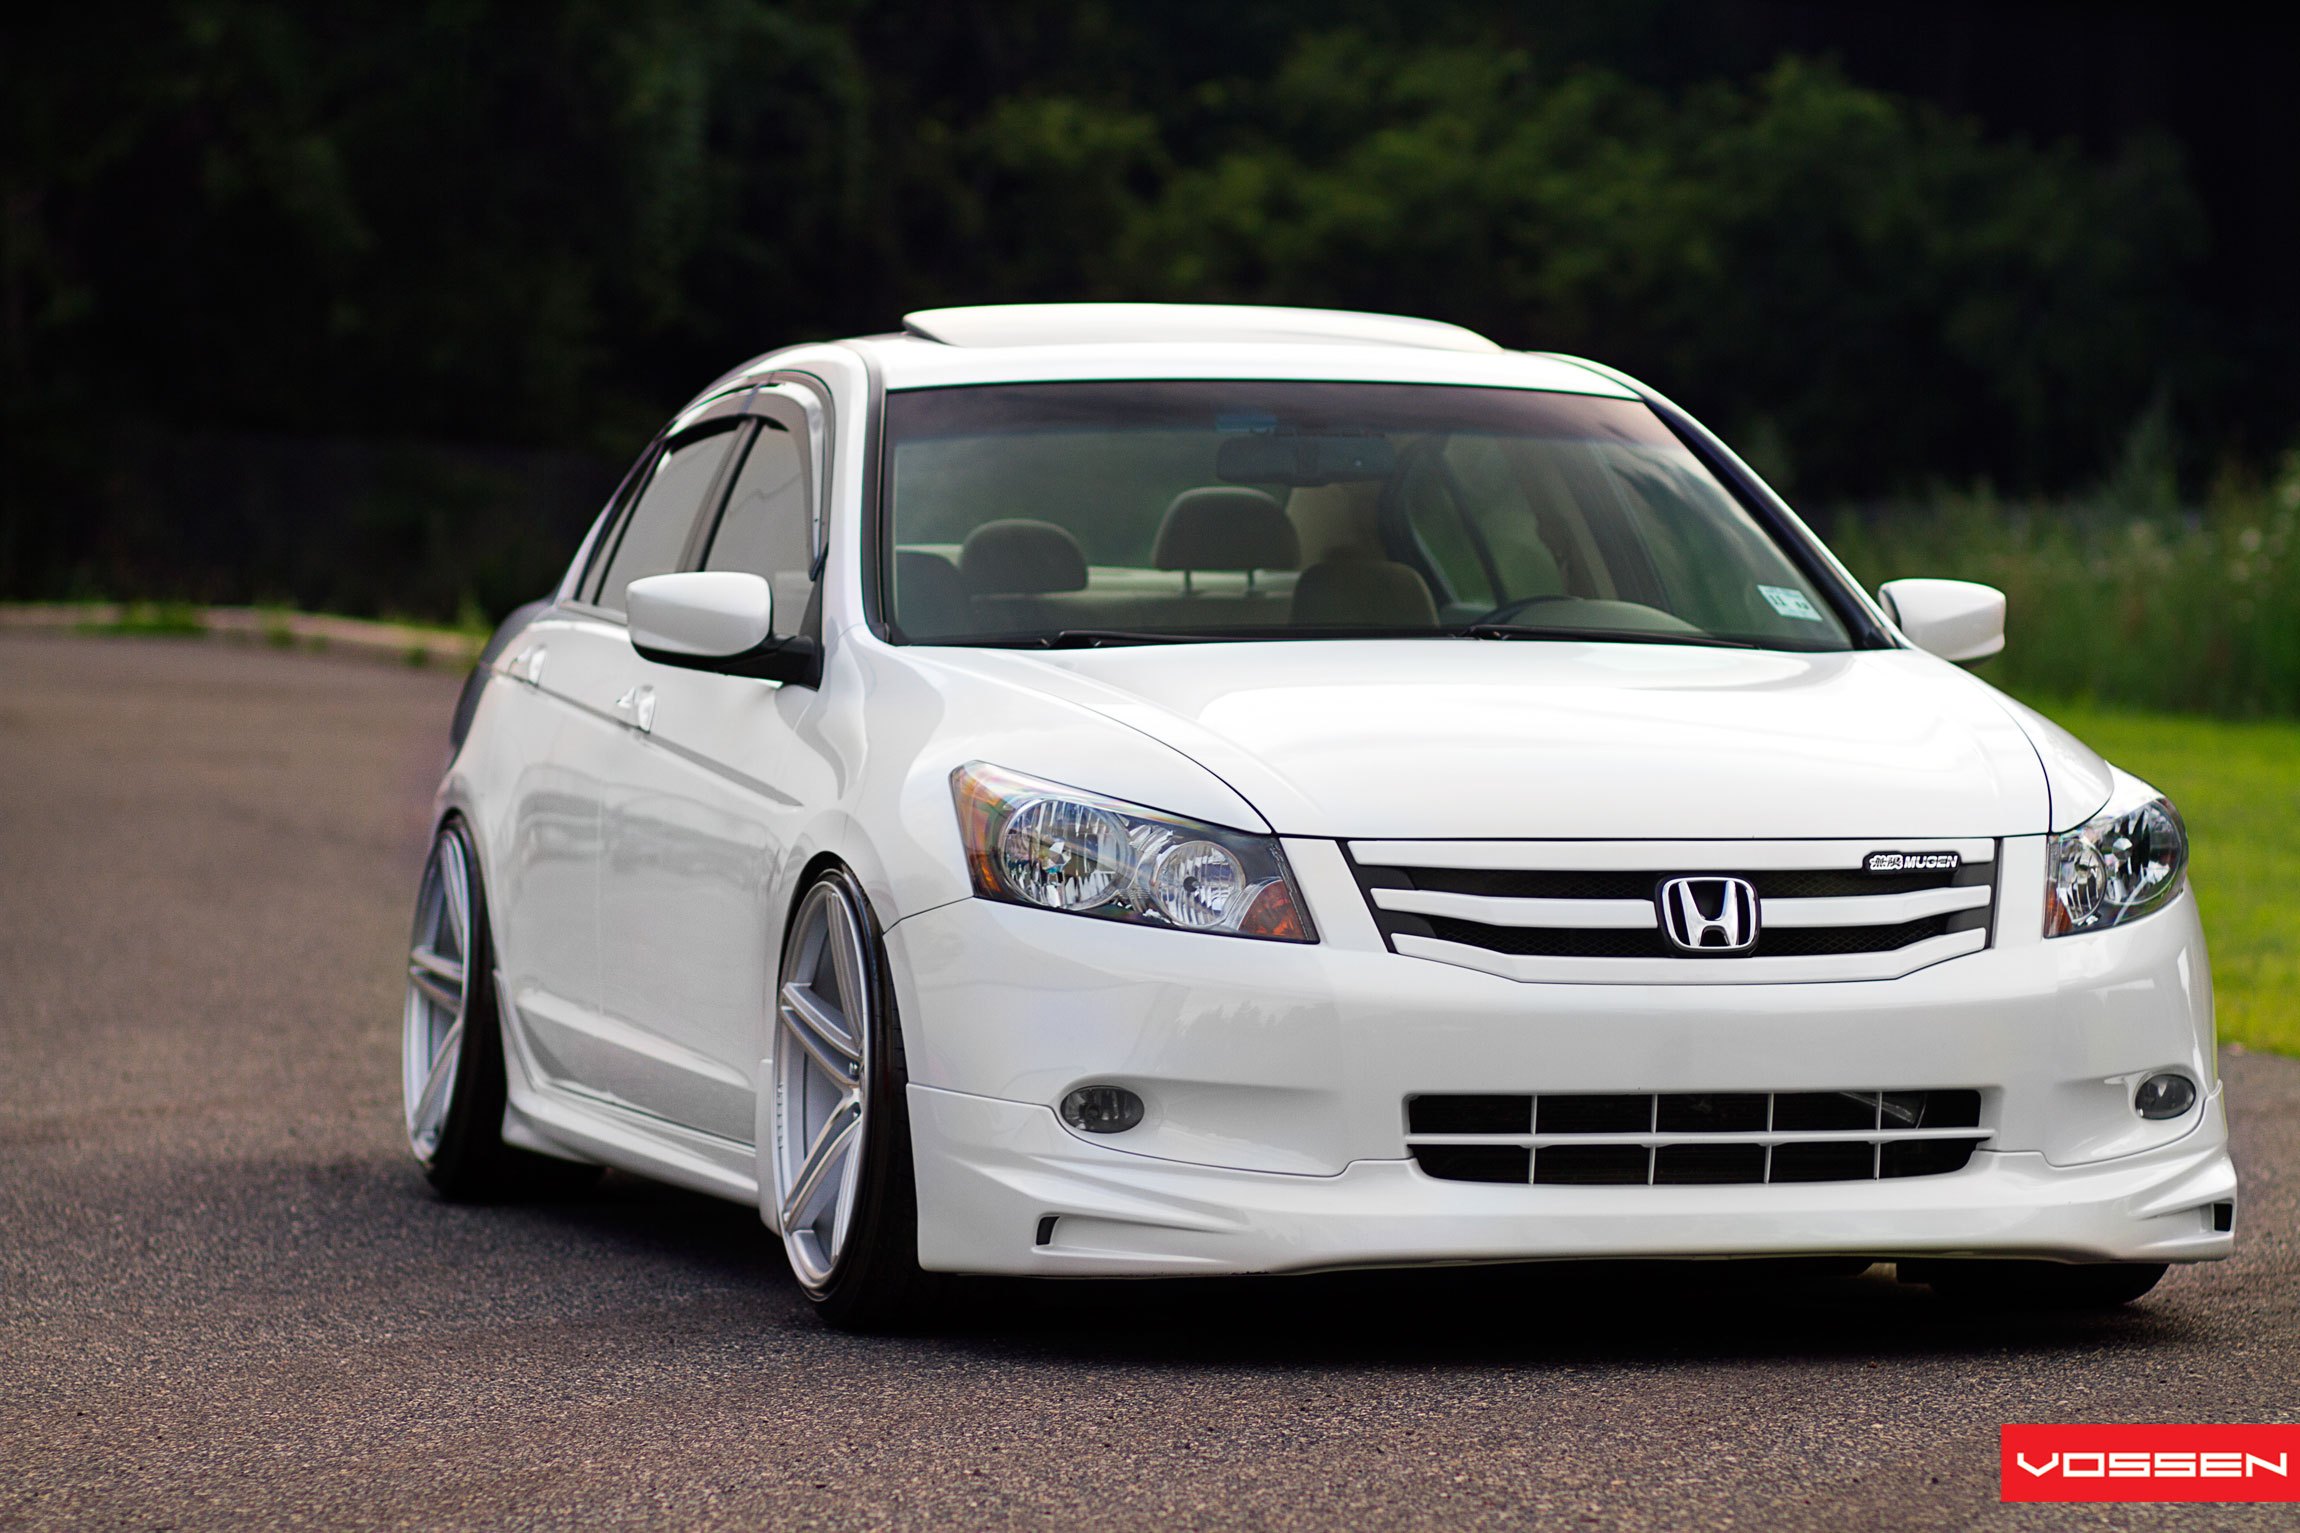 White Honda Accord with Custom Painted Grille - Photo by Vossen